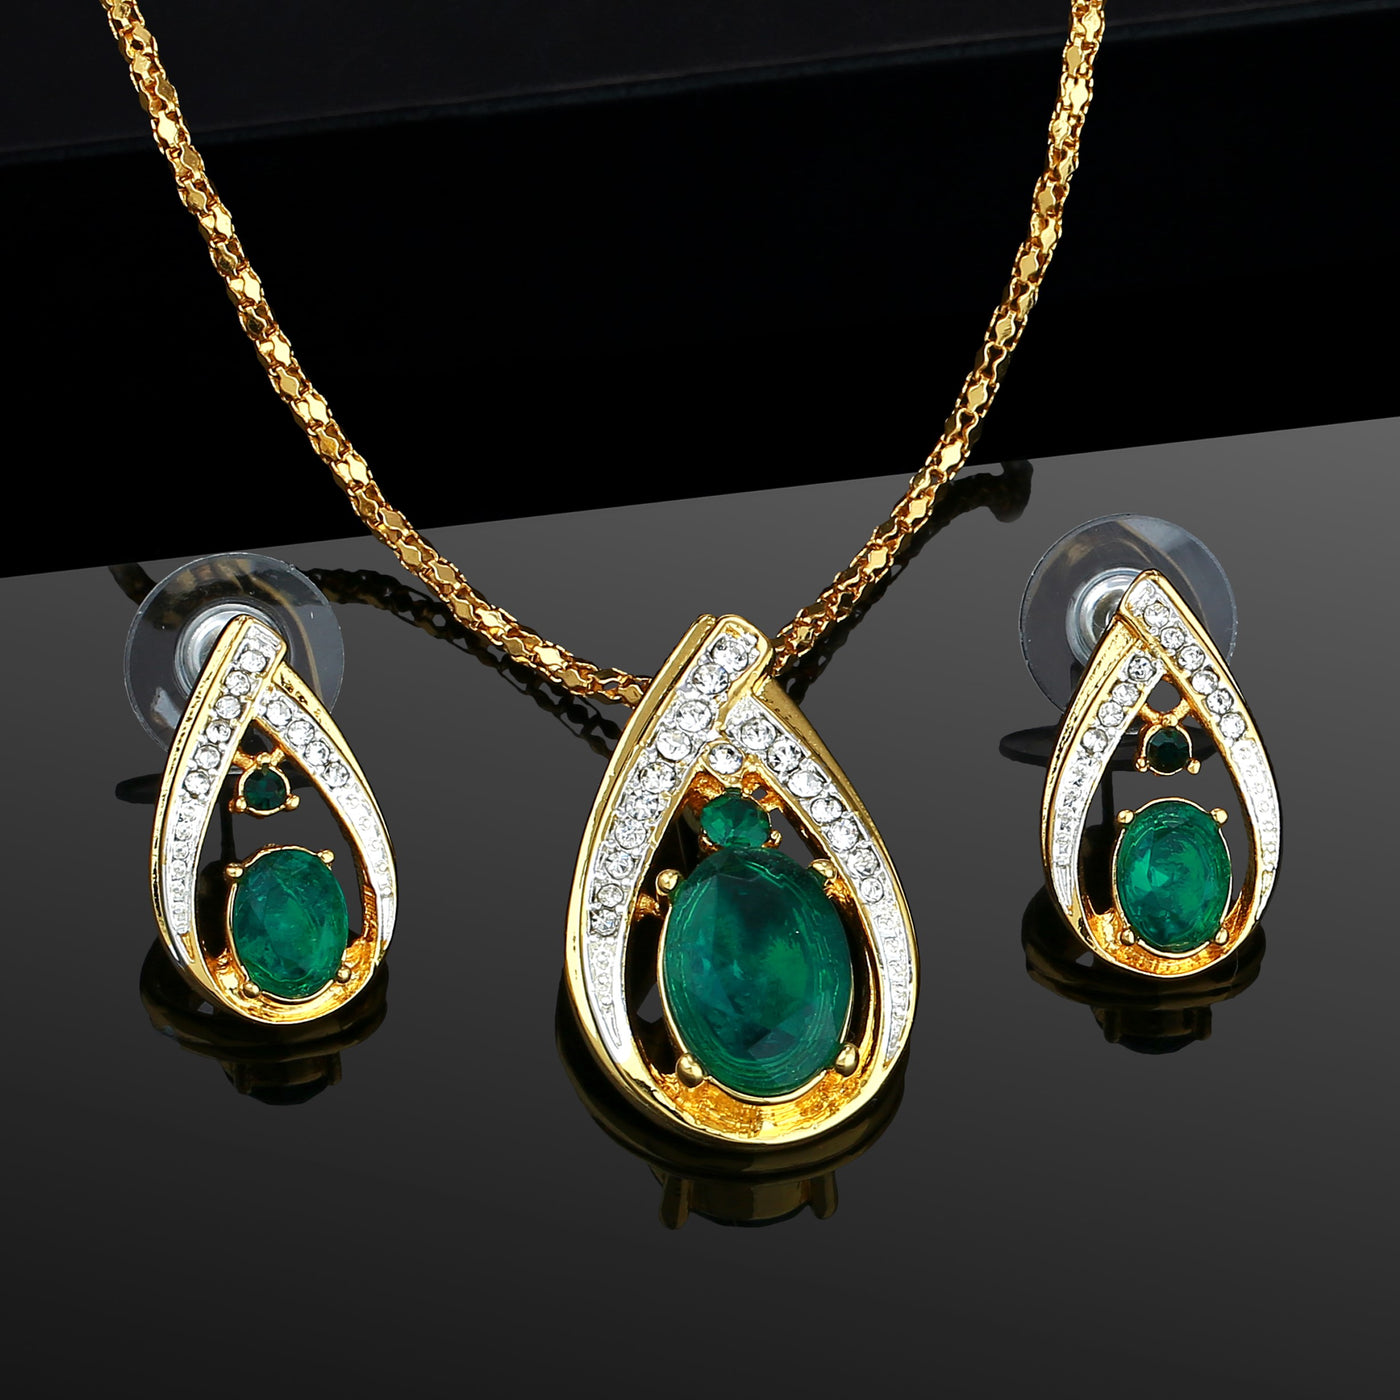 Estele Trendy and Fancy Gold Plated Emerald Stone Pendant Set for Women / Girls